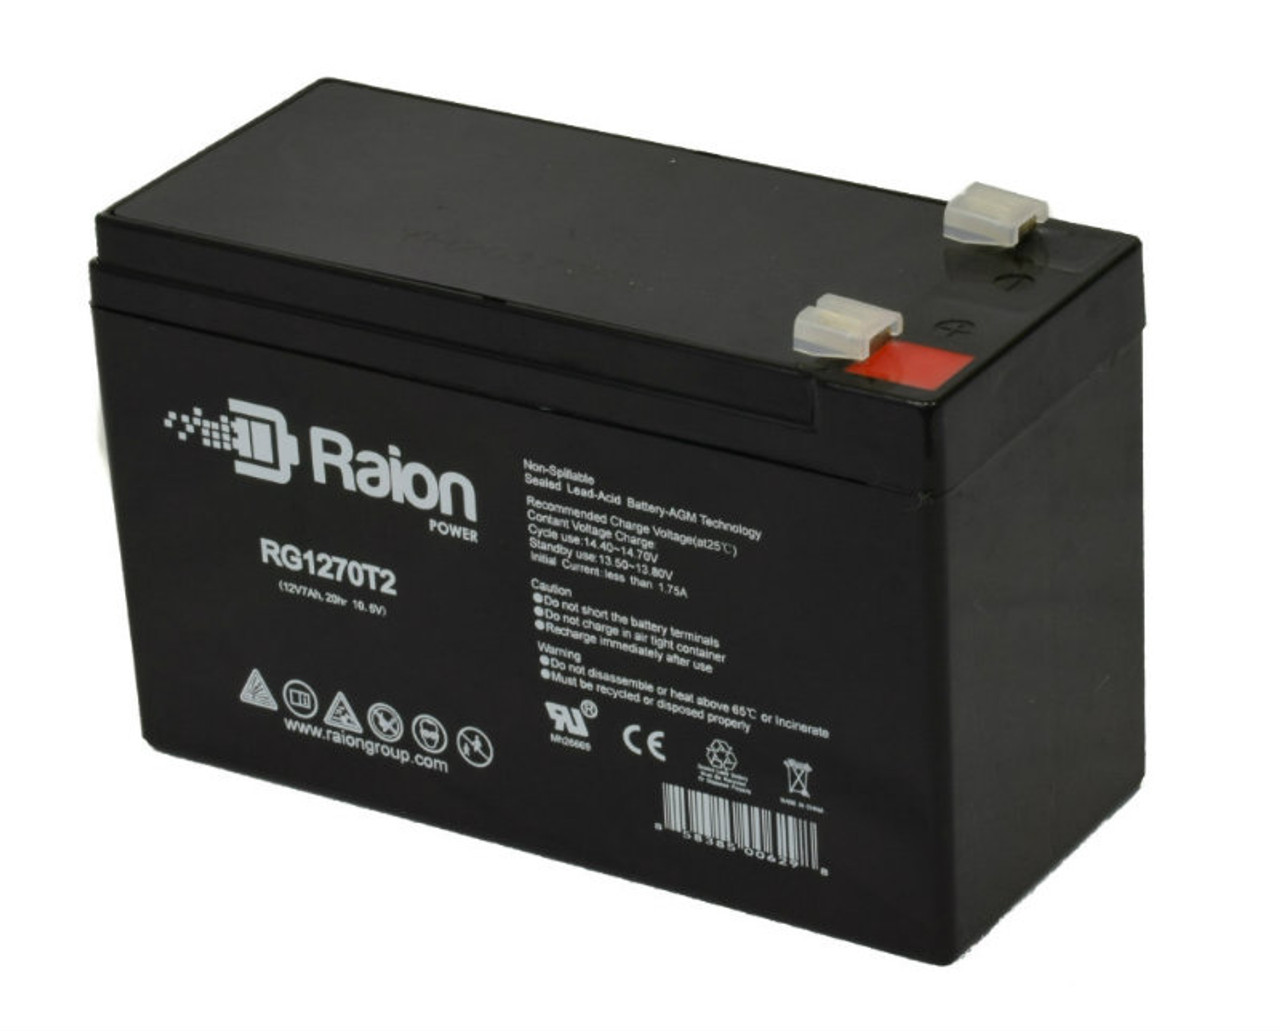 Raion Power Replacement 12V 7Ah RG1270T1 Fire Alarm Battery for Newmox Home Alarm